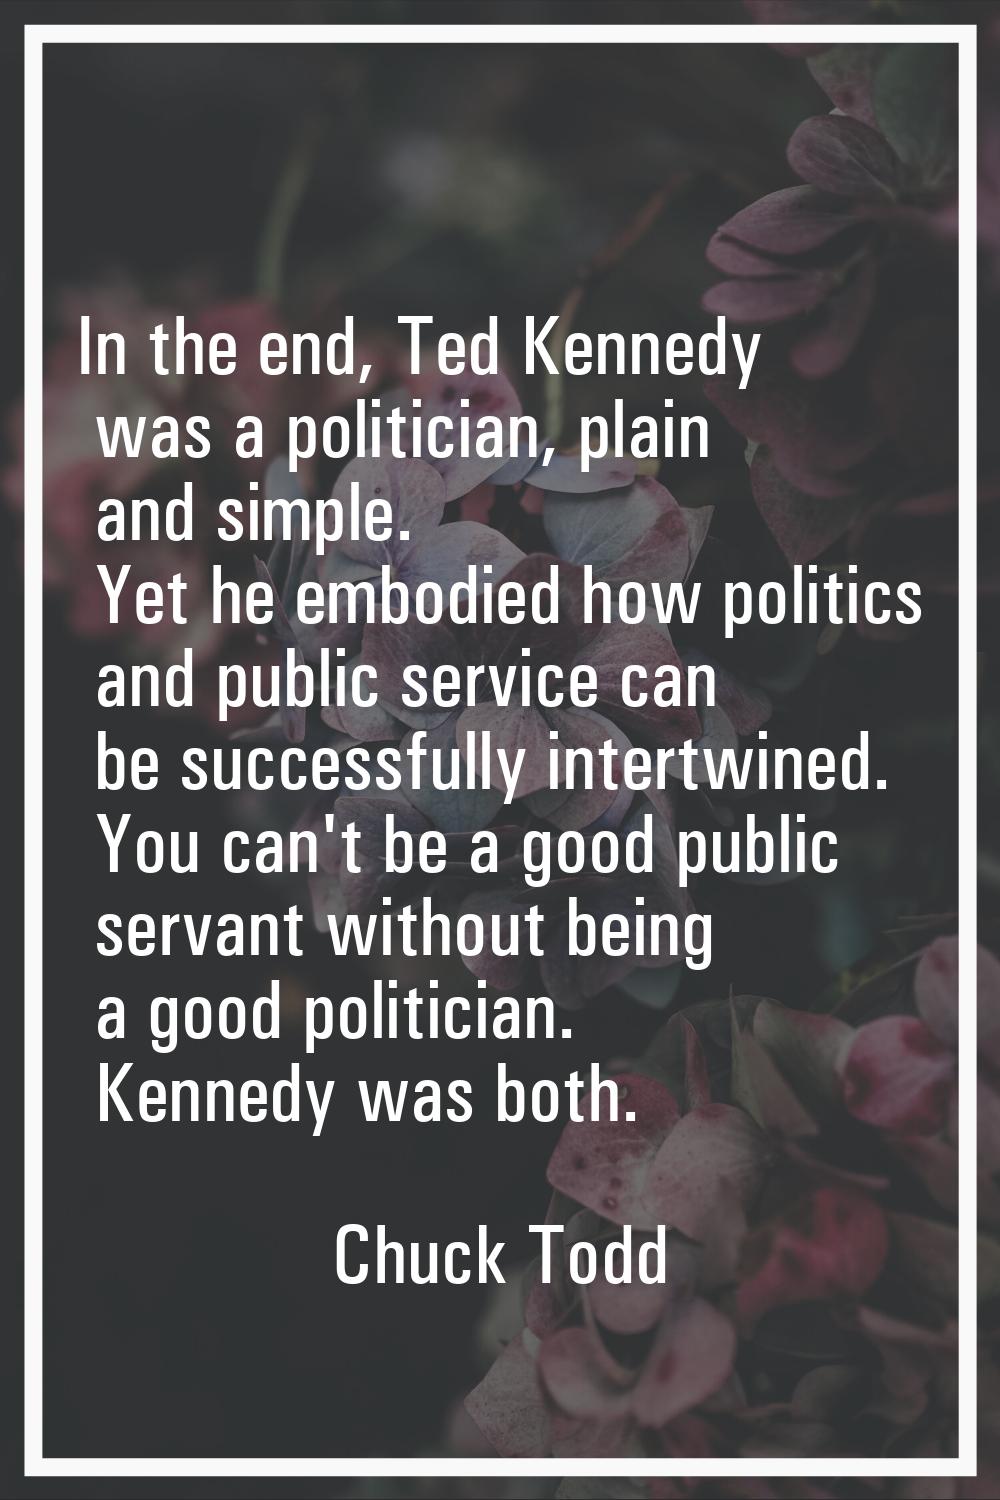 In the end, Ted Kennedy was a politician, plain and simple. Yet he embodied how politics and public